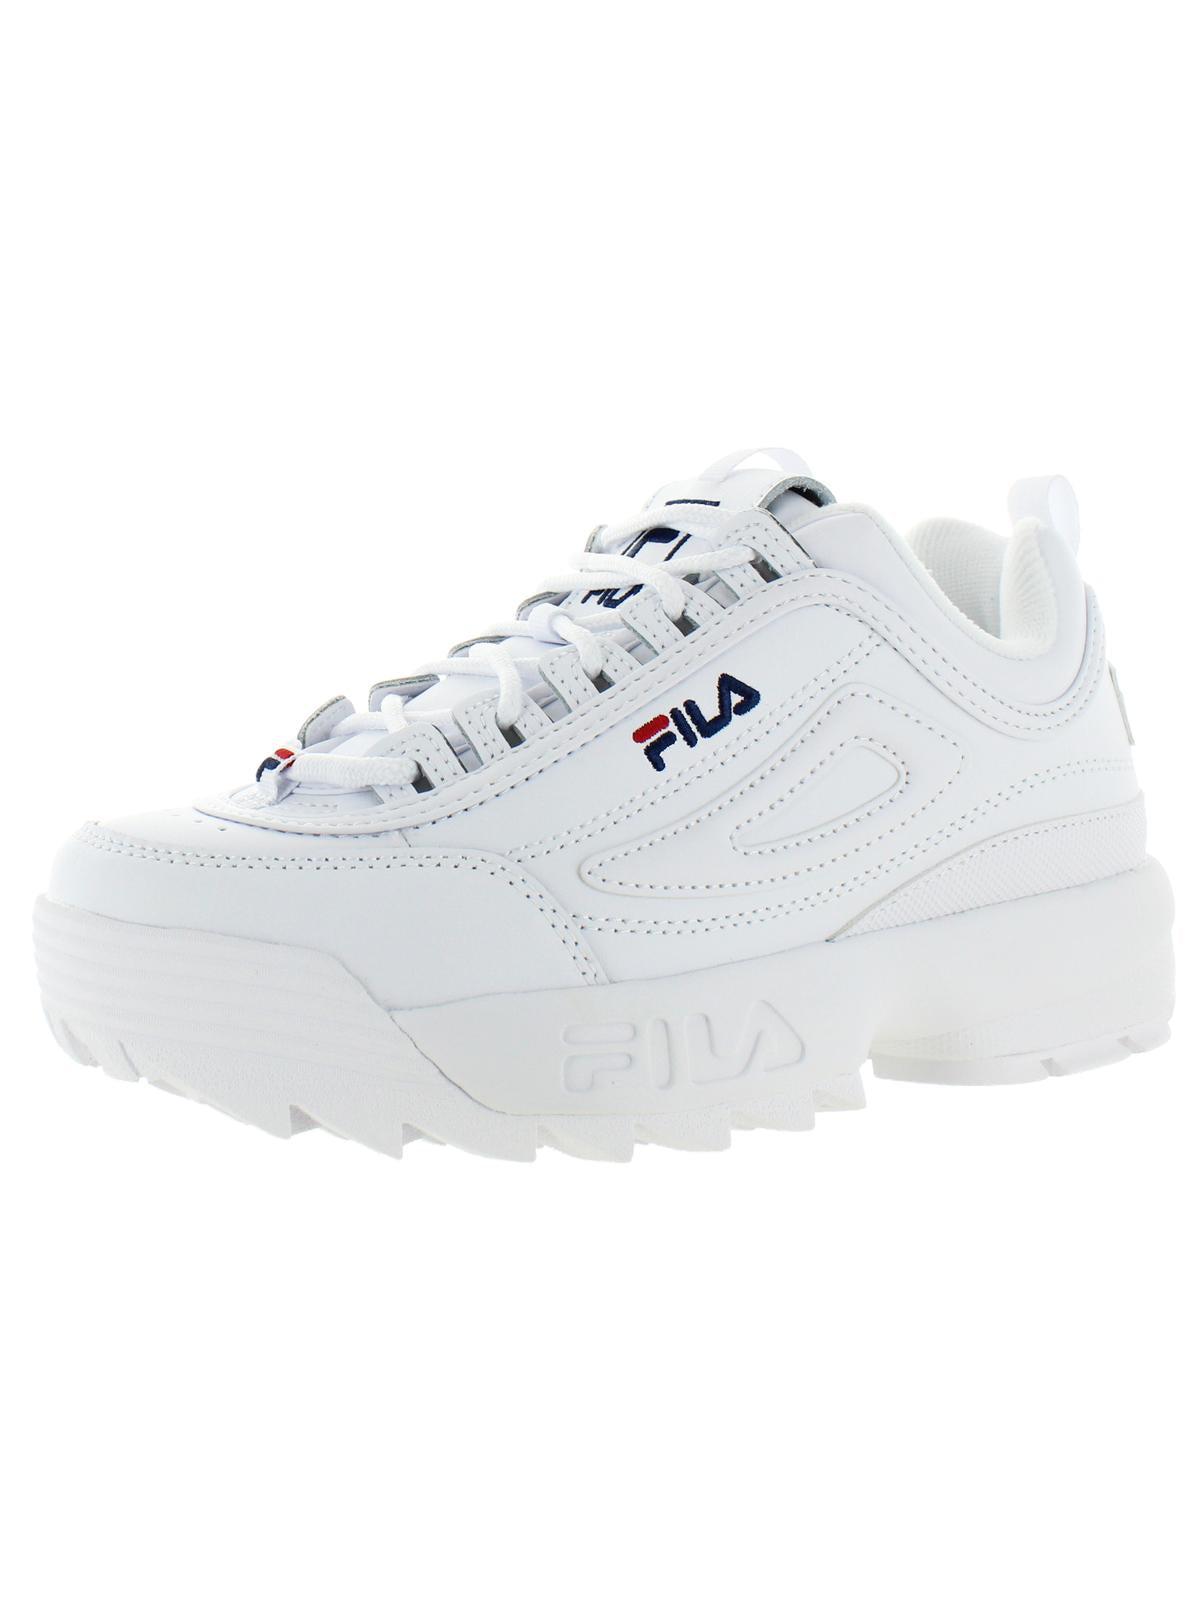 Fila Disruptor Ii Premium Leather Padded Insole Sneakers in White | Lyst